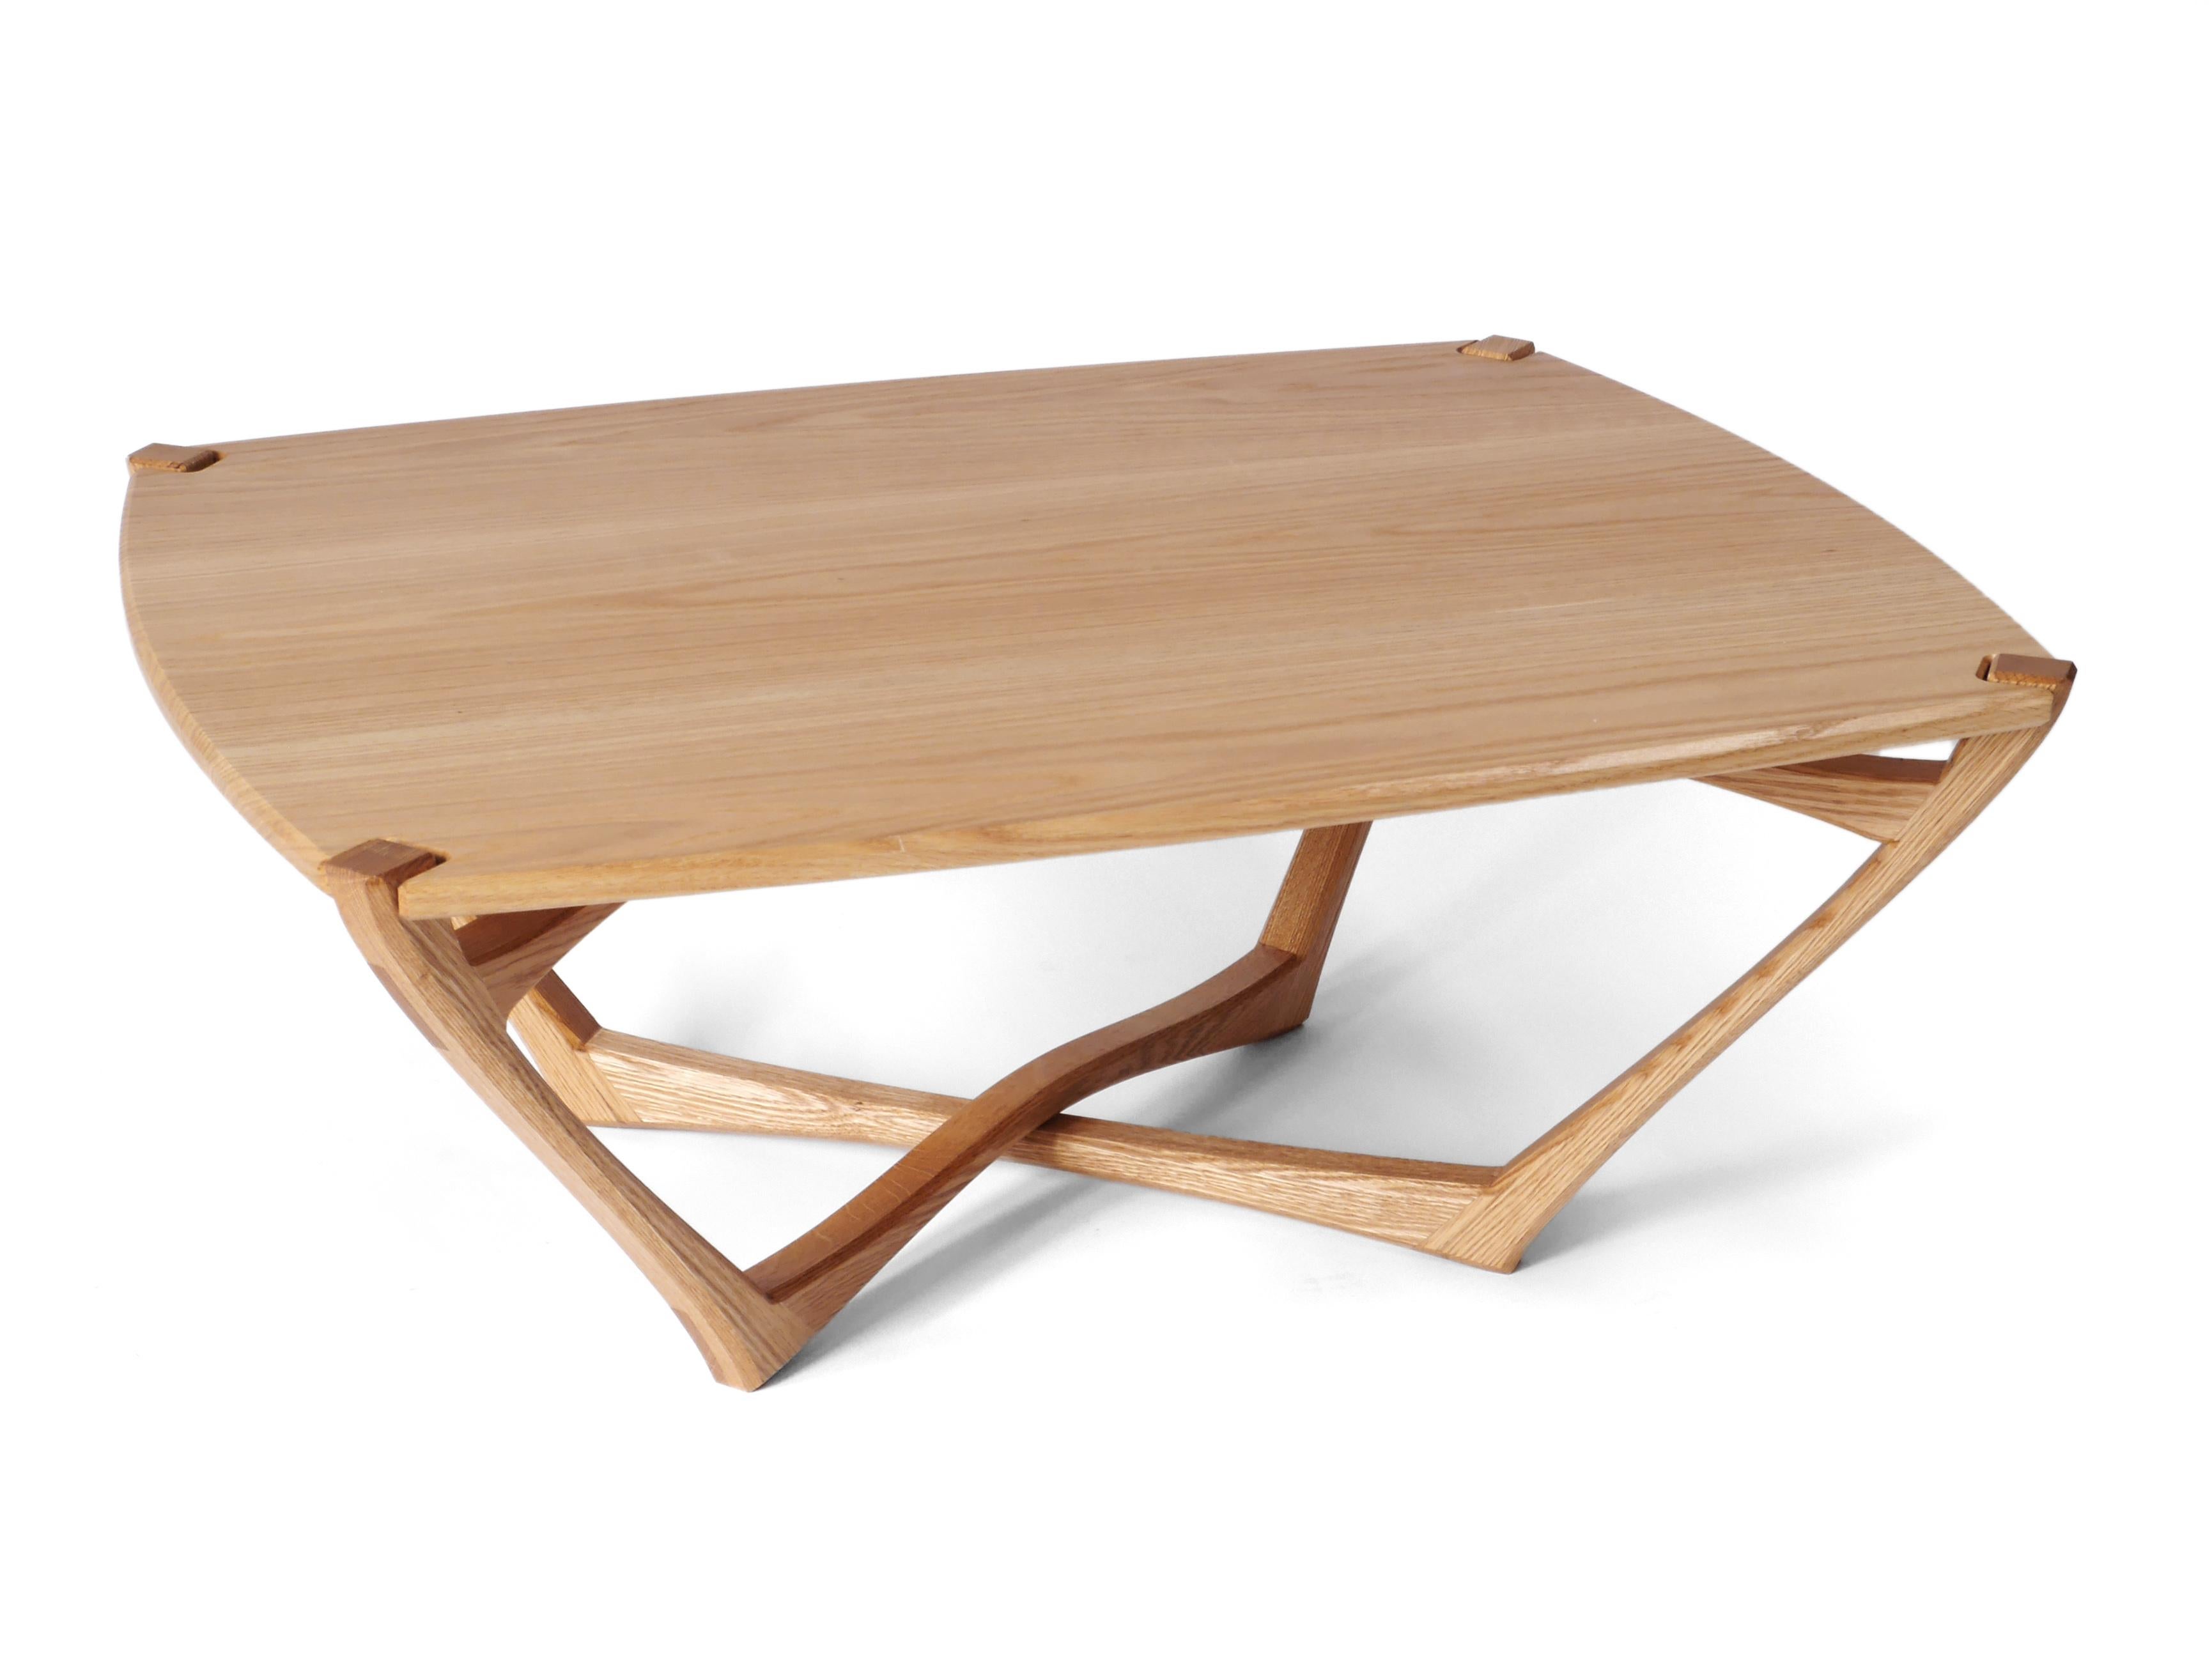 The Mistral Coffee Table is playful and full of life with a fluid form and detail rich construction. It’s made out of solid oak hardwood and built with exposed joinery that has been carefully designed for beauty and strength. 

The design was